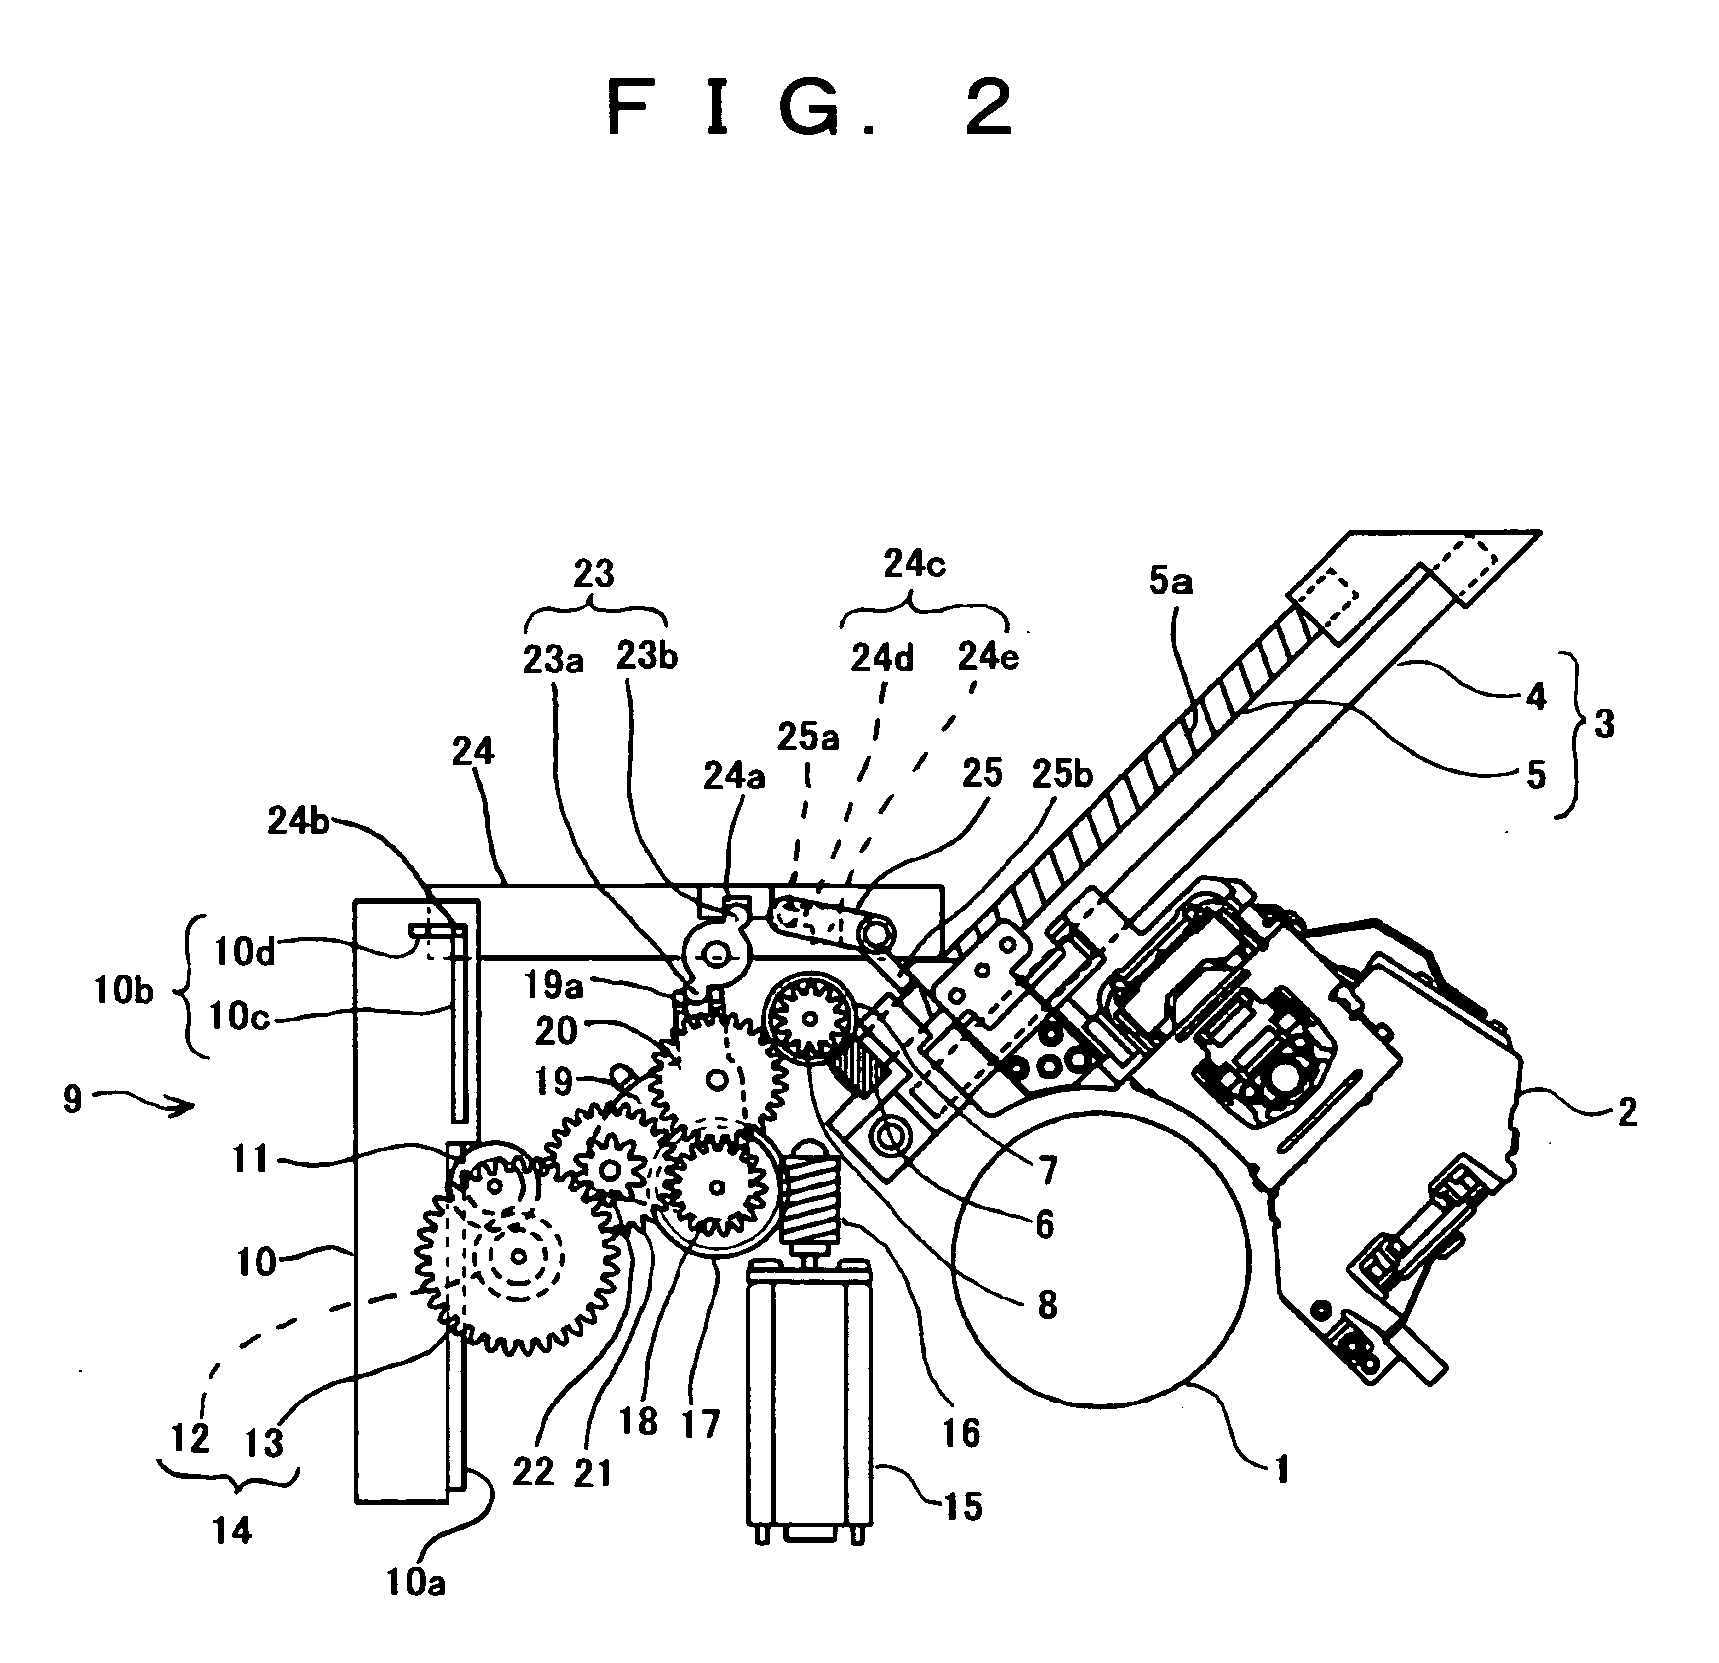 Power switching system for acoustic apparatus